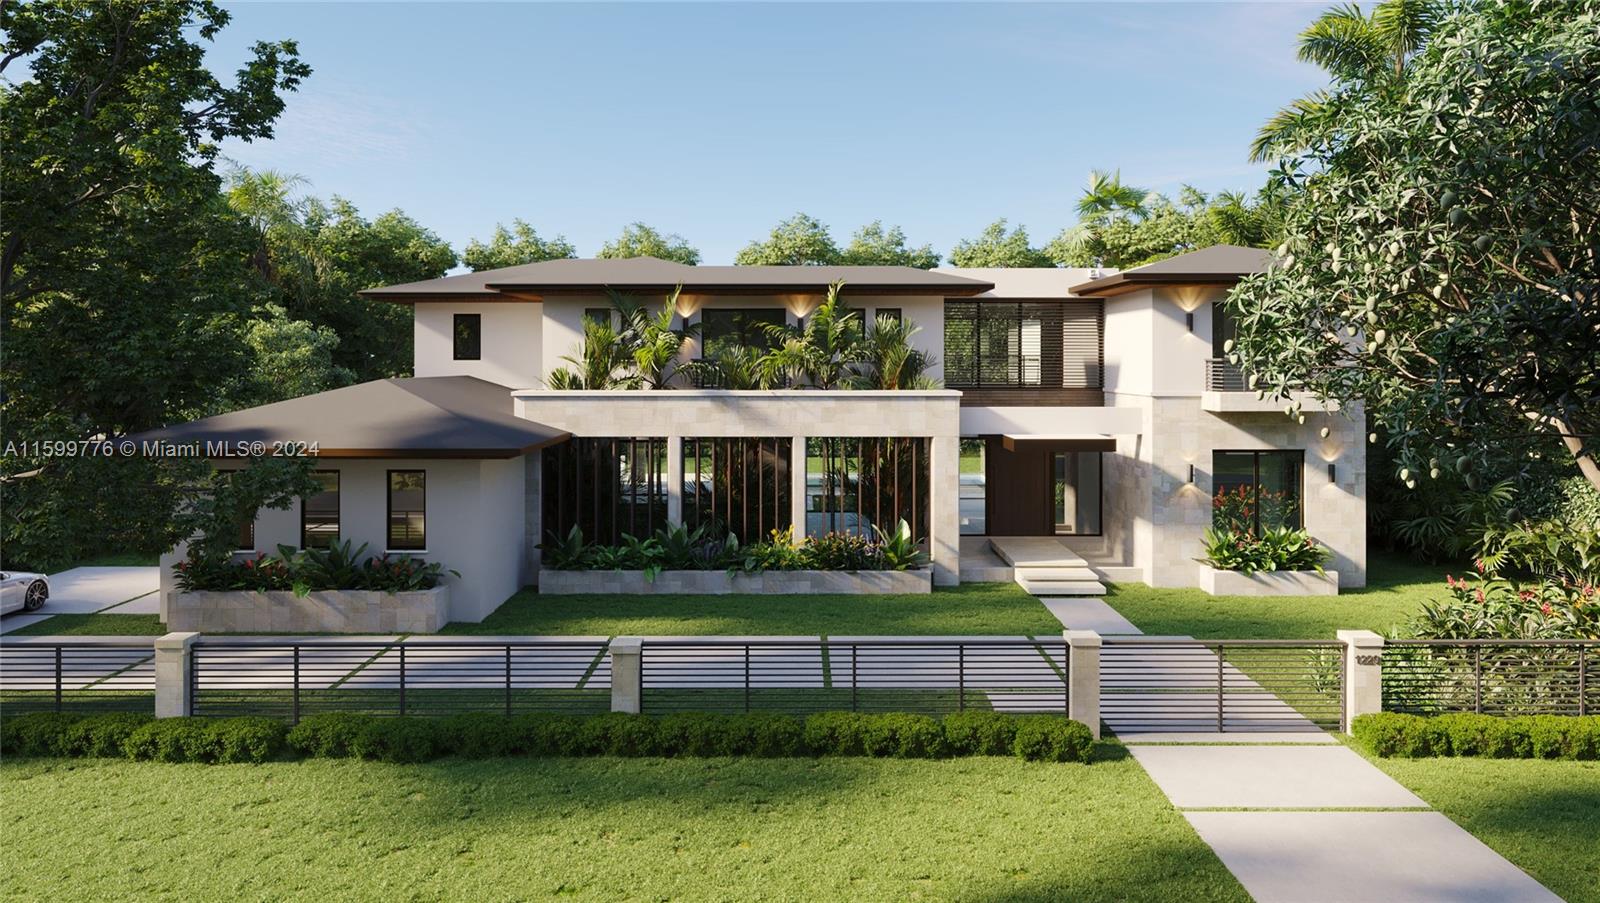 Welcome to the newest and most spectacular new construction build located in the coveted South Gables neighborhood. This Tropical Modern residence home was Designed by Giorgio Balli and sits on a expansive 17,691 sq foot lot on a quiet picturesque Andora Ave in South Gables, walking distance to Coconut Grove, Ponce Davis and South Miami. This Custom home boasts a perfectly executed and thoughtfully designed floorplan with 6,090 sq ft of living space and 7,202 sq ft of Total square footage. Executed with tremendous attention to detail this 7 Bed/ 7.5 Bath features expansive living spaces, 12ft ceilings, floor to ceiling windows, custom millwork, exterior water features, Cumaroo exterior wood detailing and much more. Completion end of Summer 2024. See attachments for spec sheet and plans*